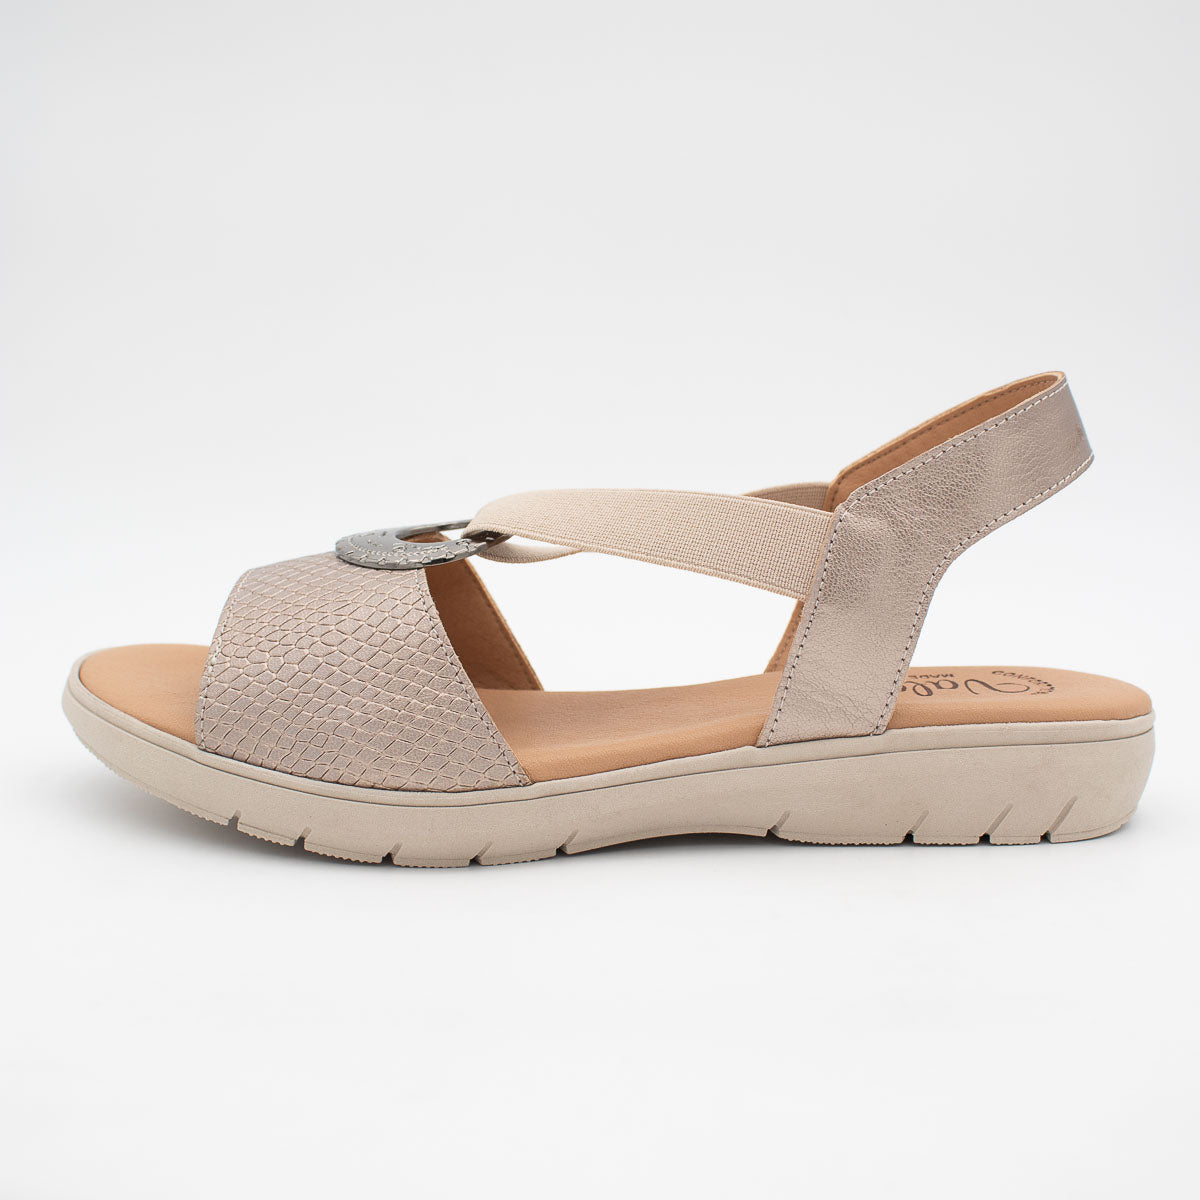 Stretchy Slip-On Summer Sandals in Taupe